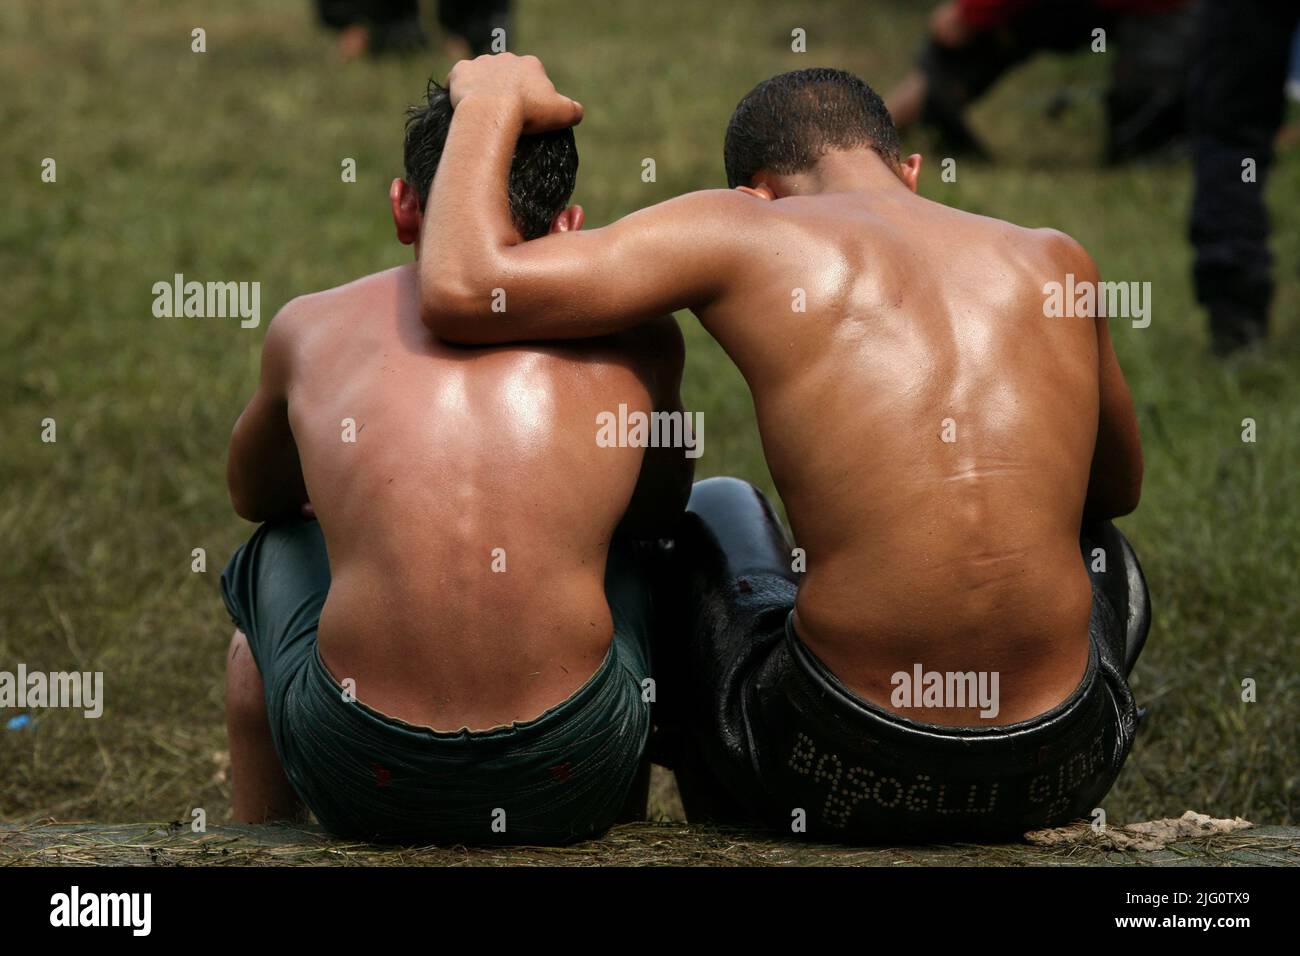 Kırkpınar (Turkish Oil Wrestling). Young wrestlers react after losing their fights during the 648th Kırkpınar Tournament in Edirne, Turkey, on 5 July 2009. Kırkpınar wrestlers compete stripped to the waist and smeared their bodies with olive oil. Stock Photo